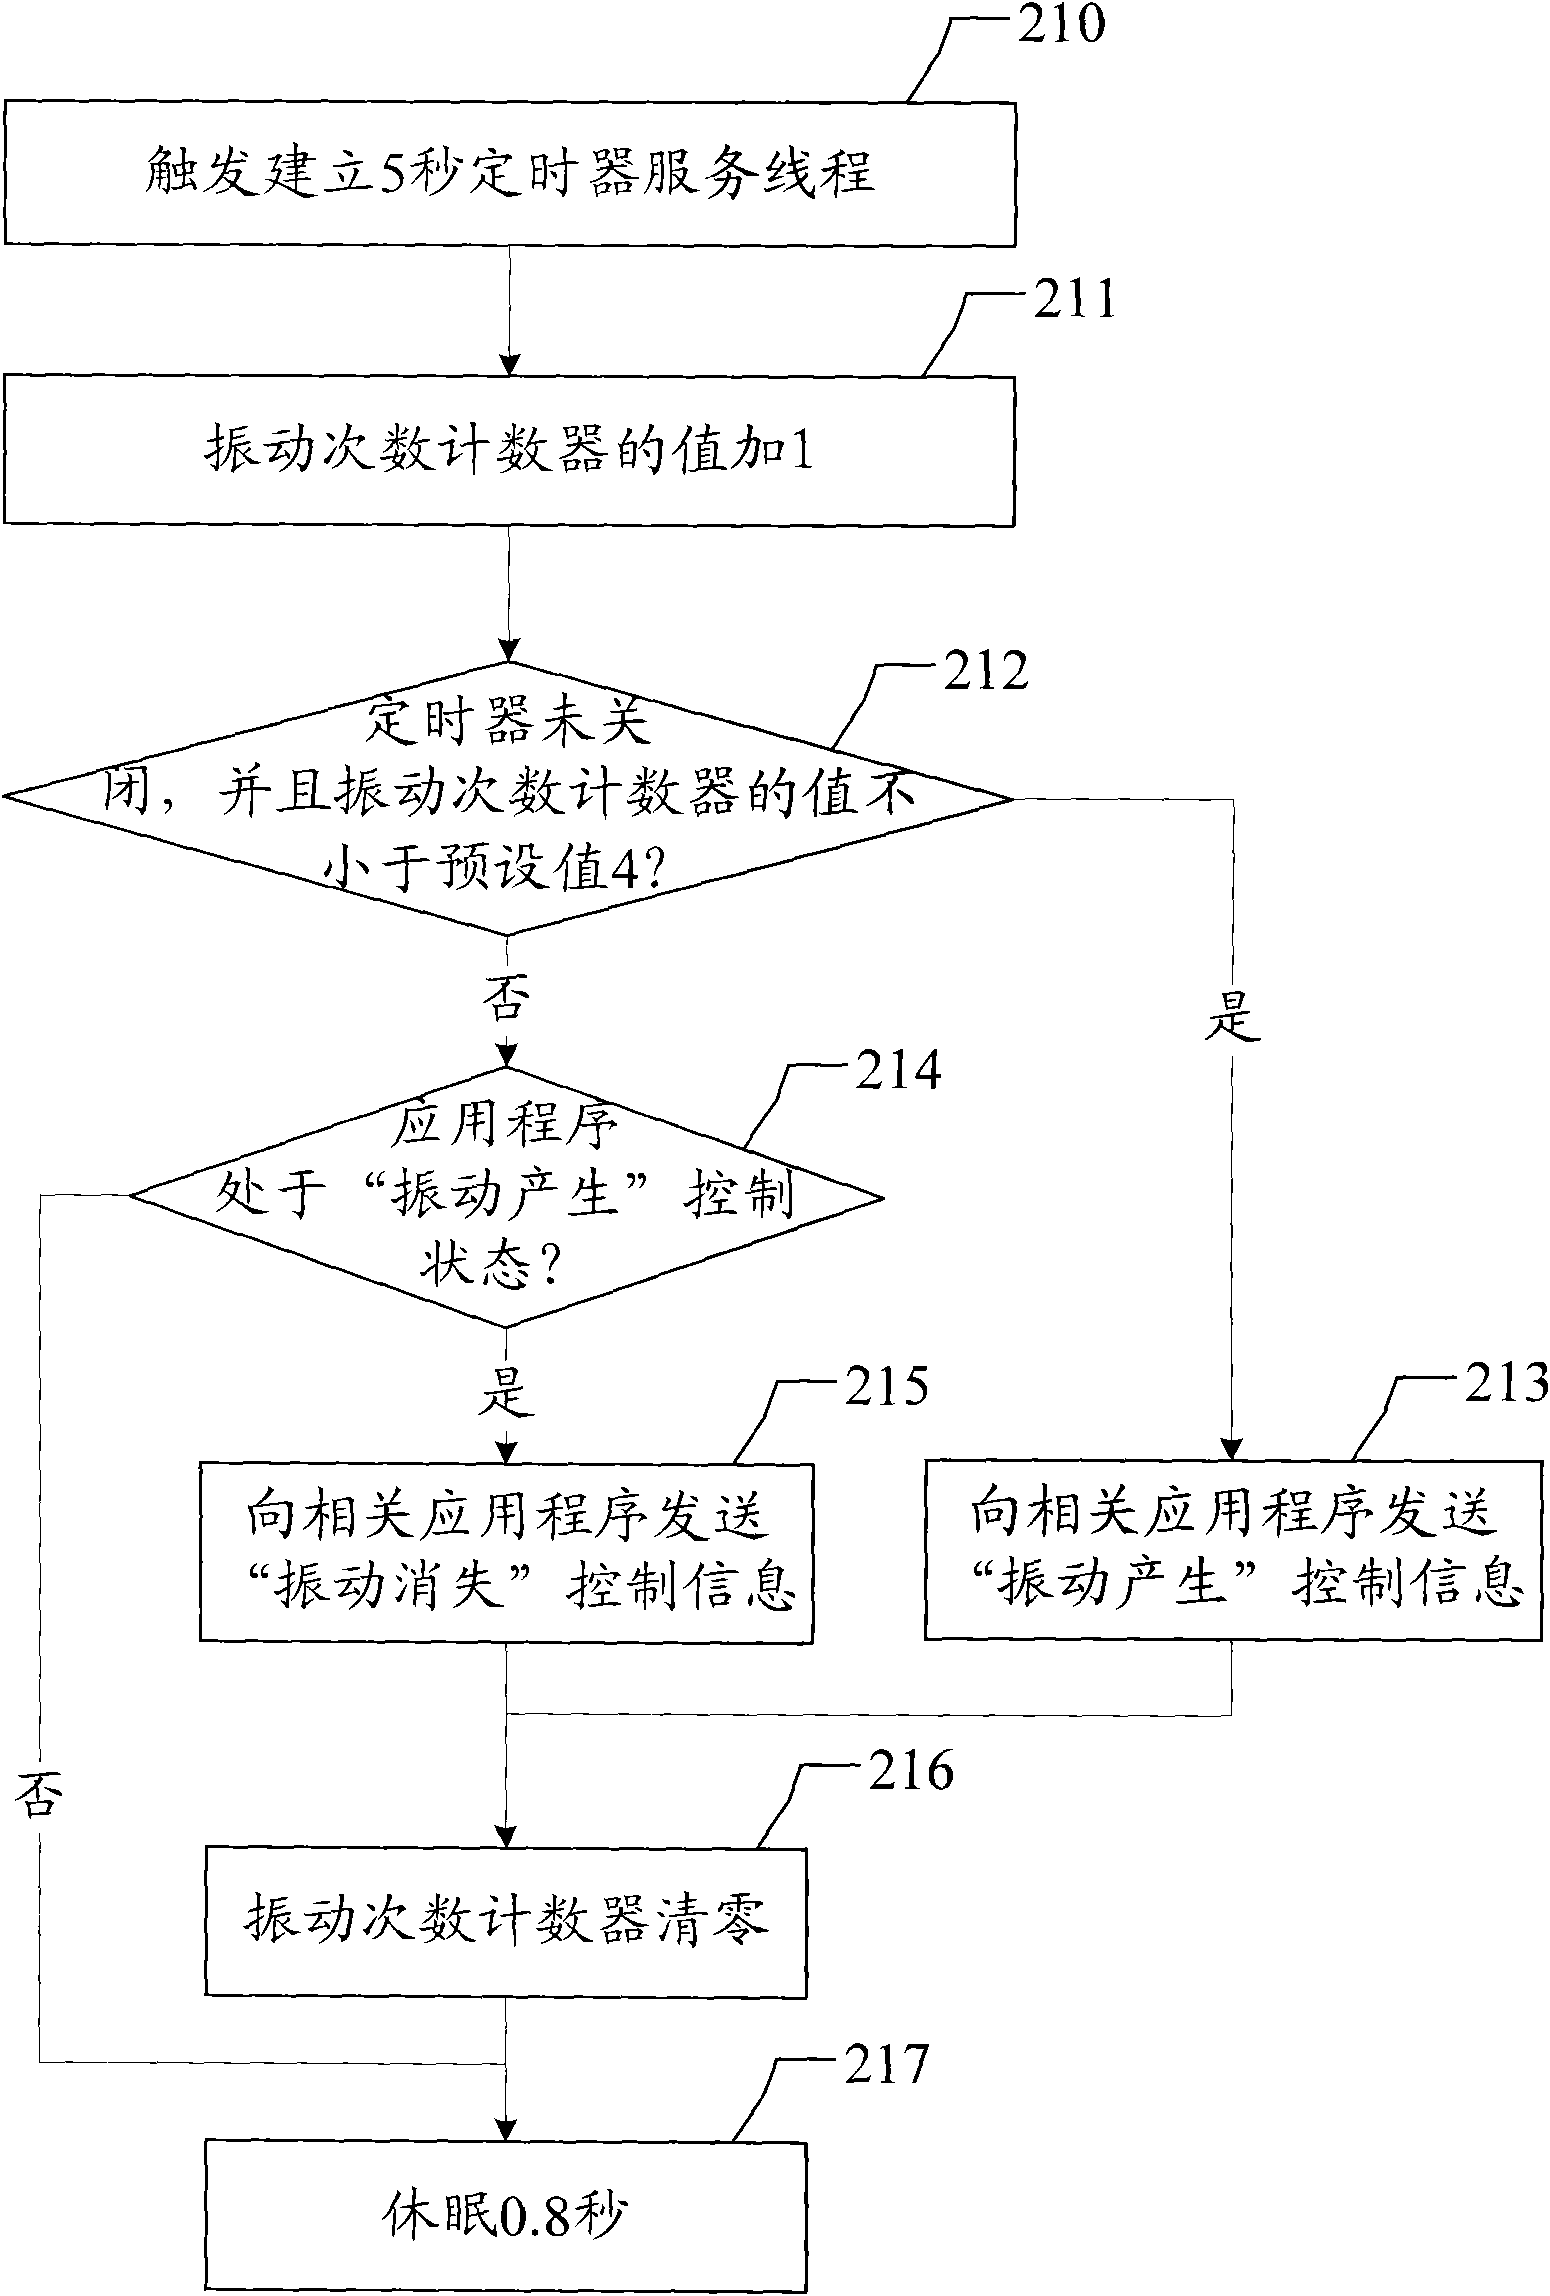 Method for processing portable electronic equipment and portable electronic equipment